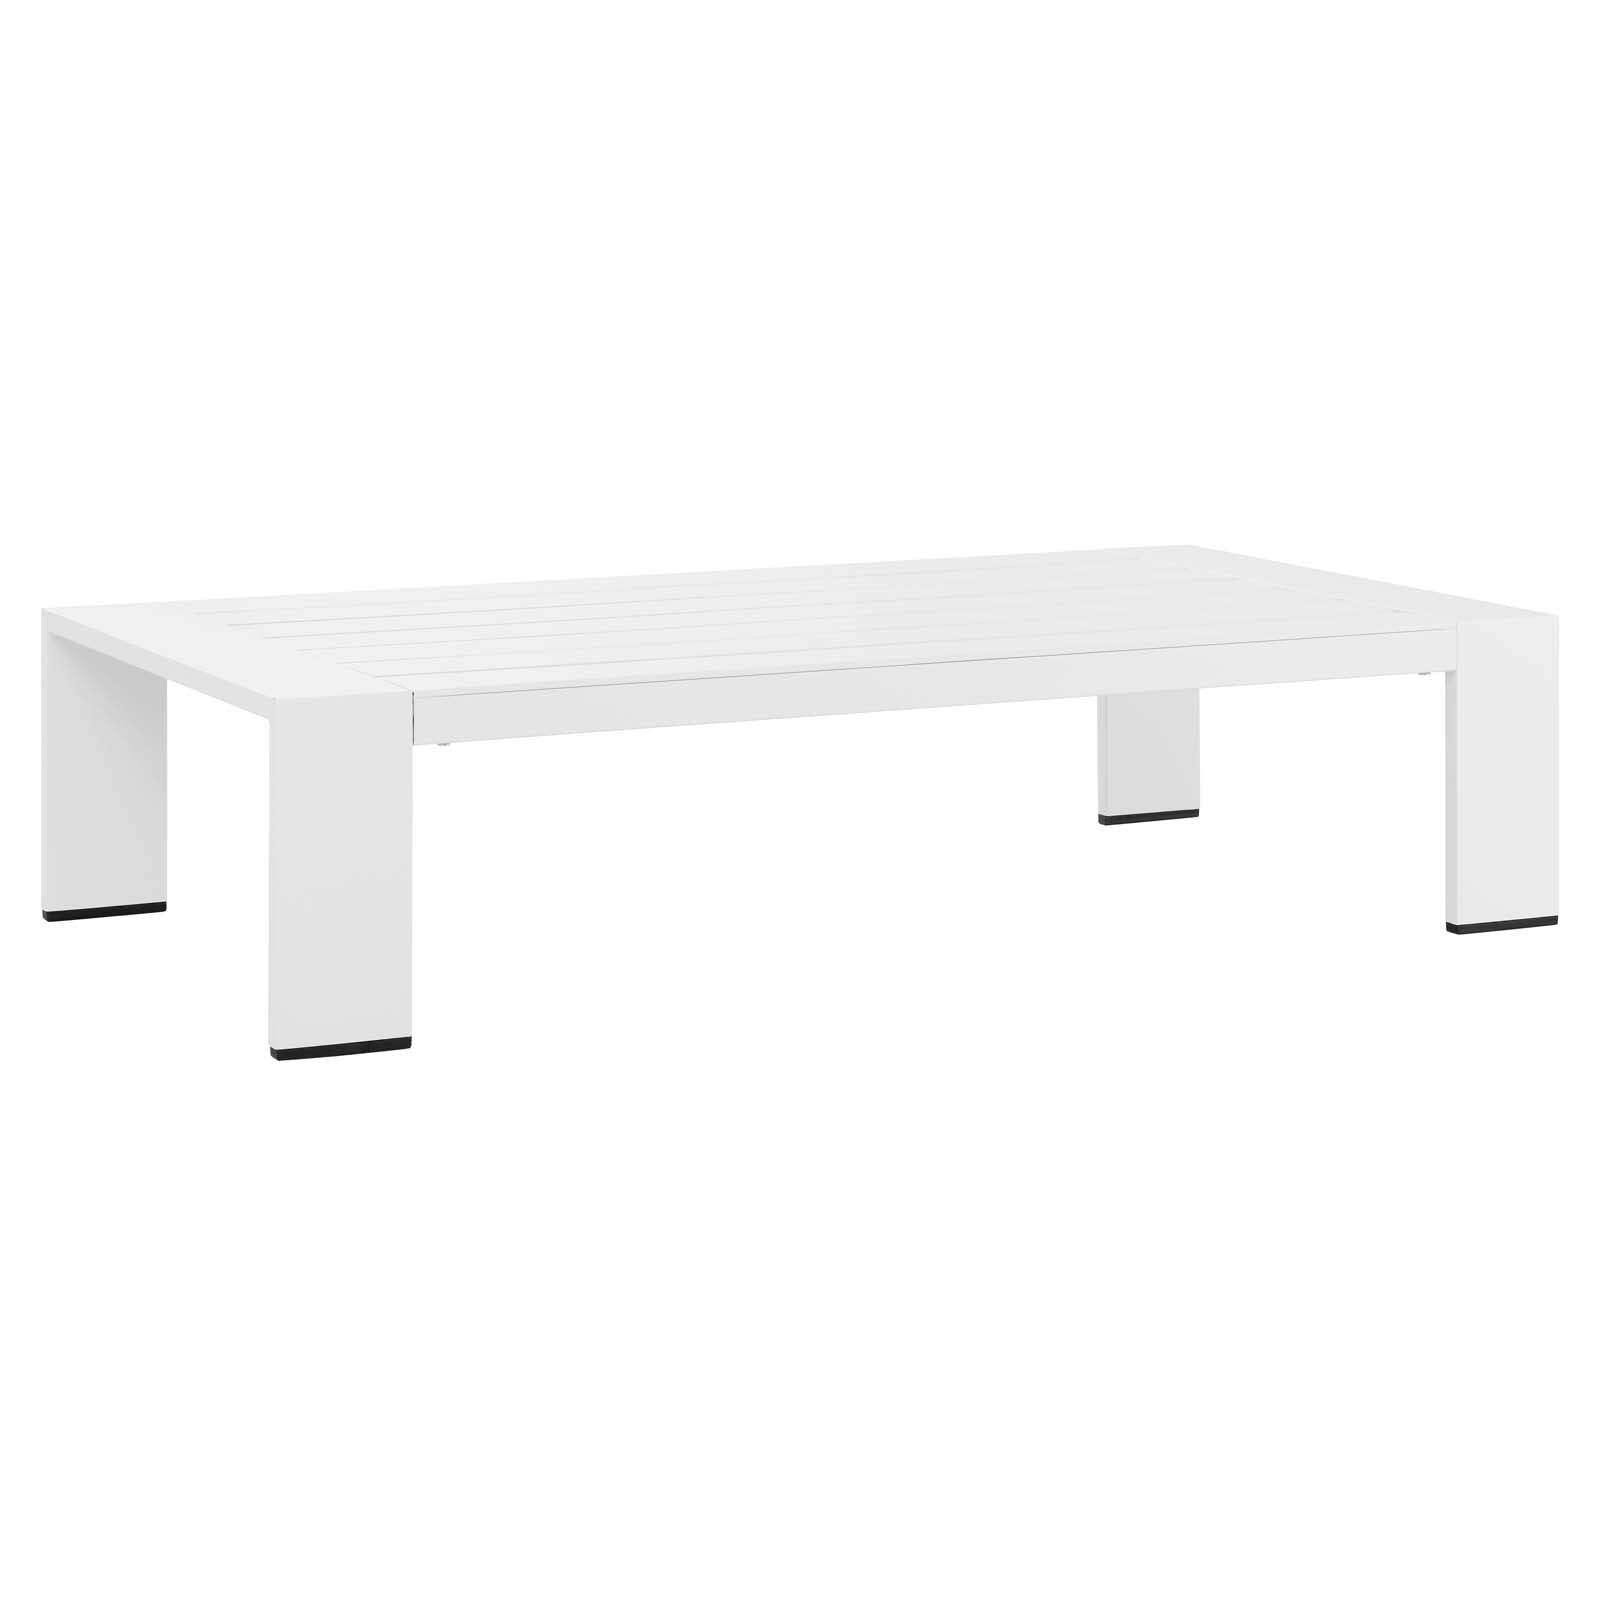 Brentwood Outdoor Patio Powder-Coated Aluminum Coffee Table